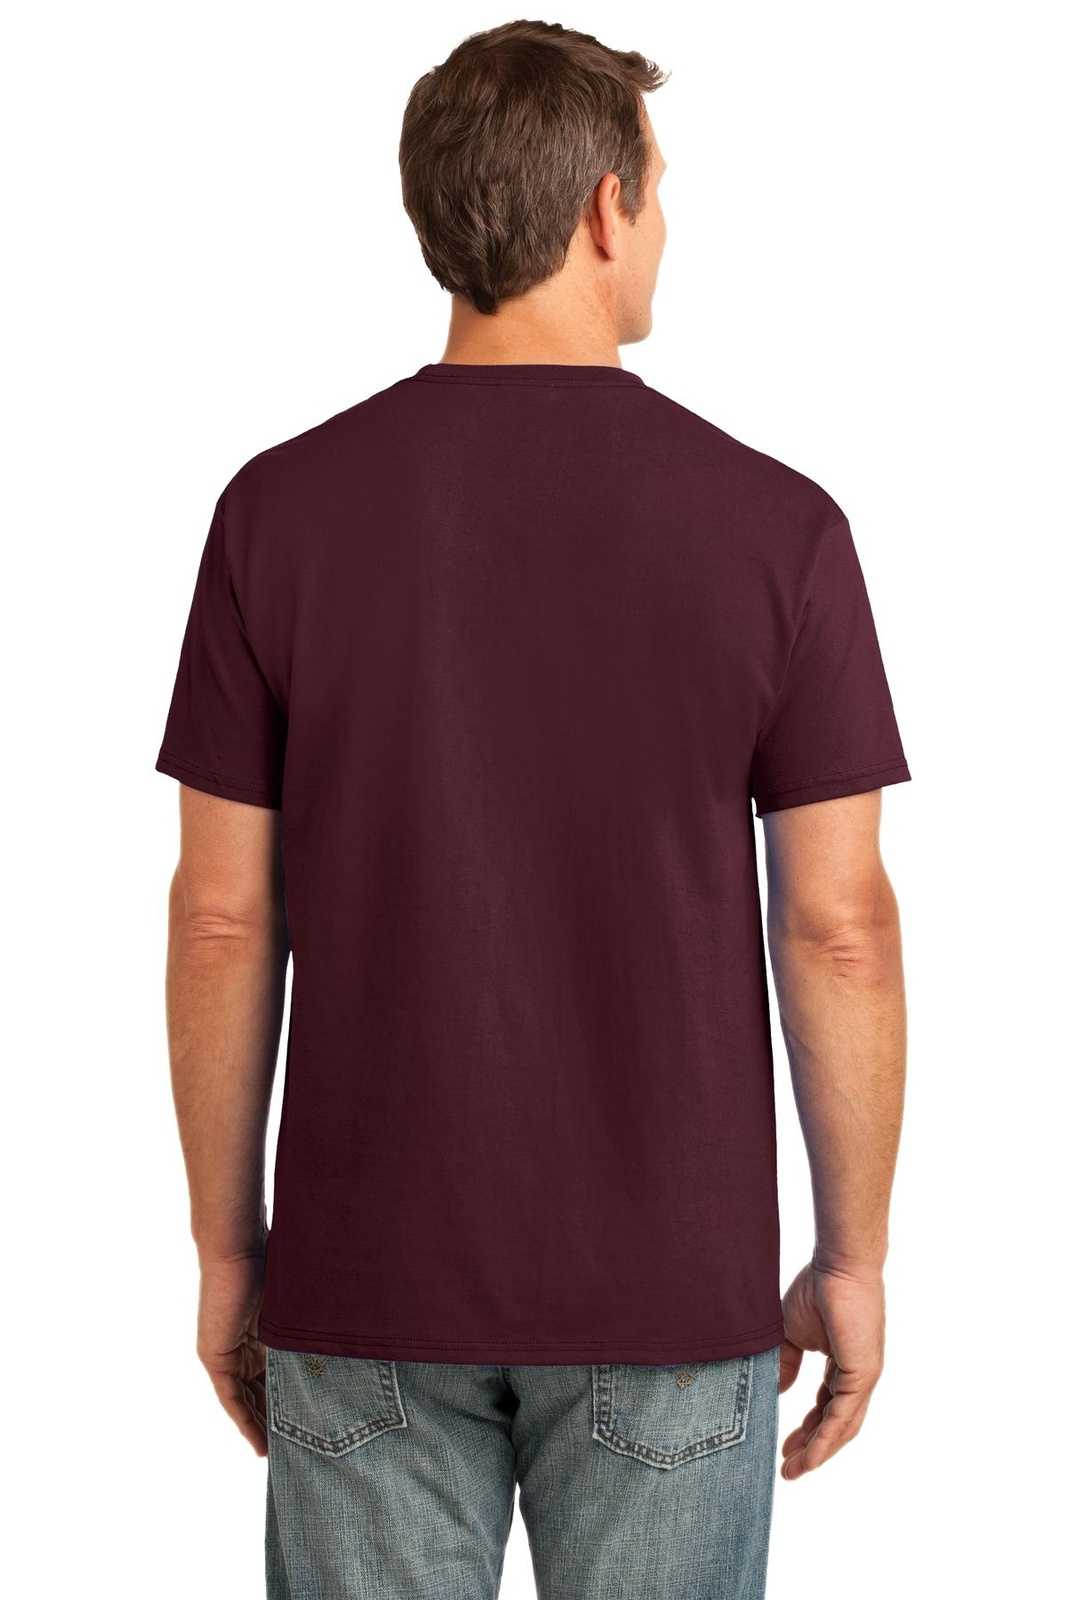 Port &amp; Company PC54P Core Cotton Pocket Tee - Athletic Maroon - HIT a Double - 2